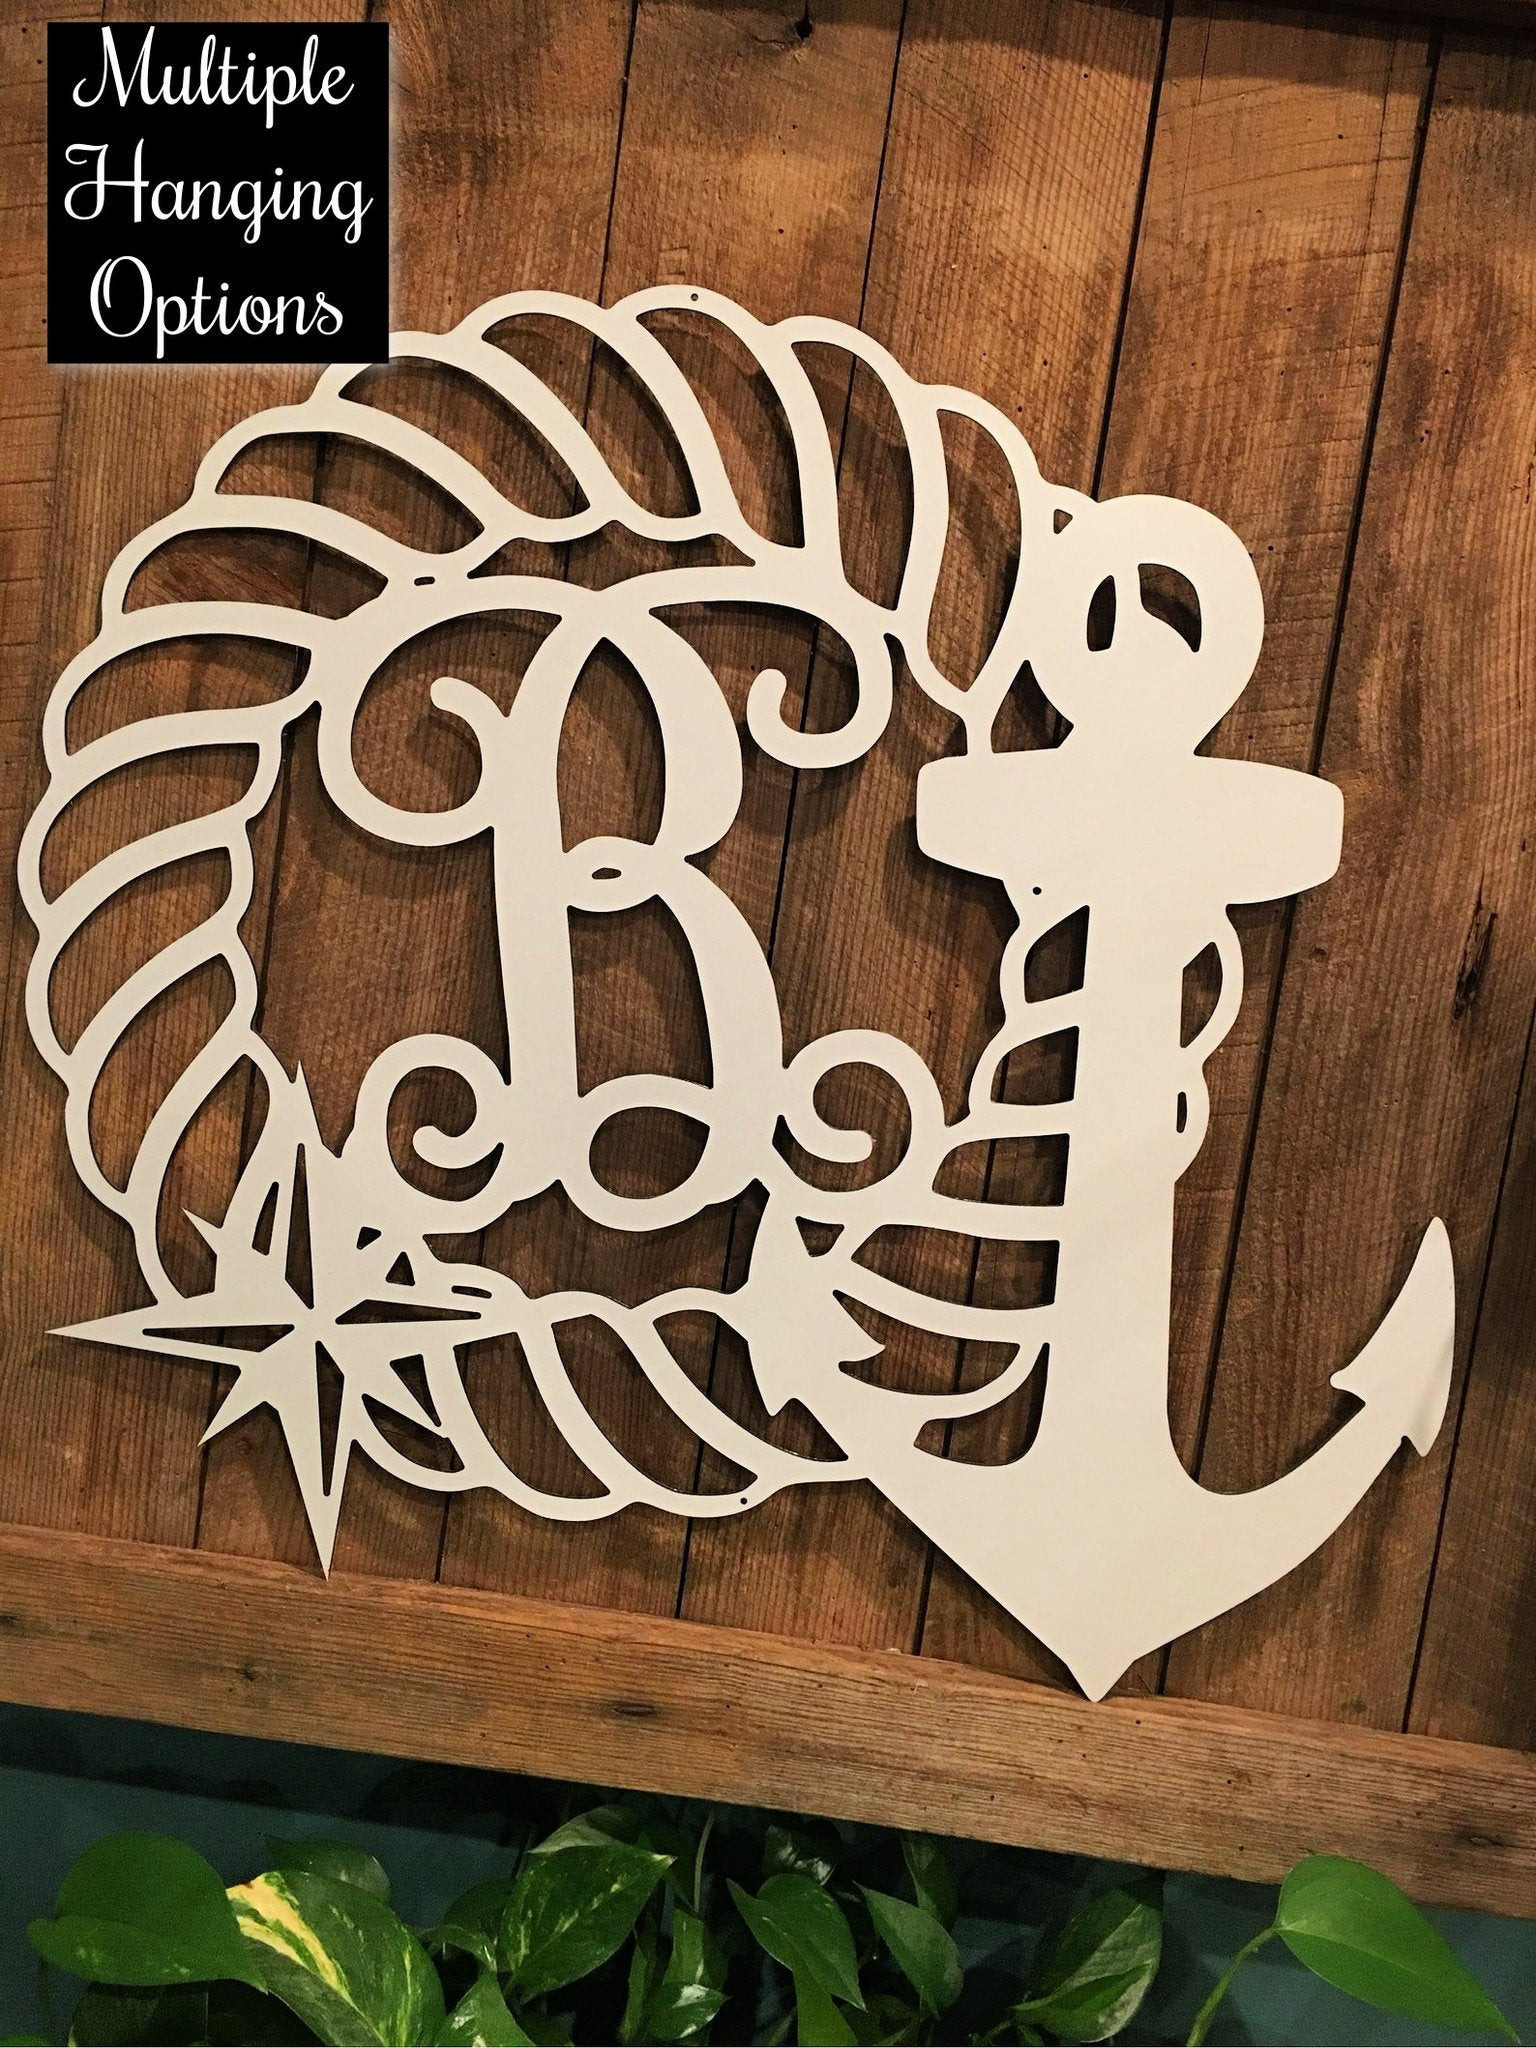 RosabellaPrint Nautical Decor Anchor Wall Hanger Custom, Personalized Monogram Or Address, Beach House Decor Sea Theme Gifts Laser Cut Metal Signs Custom Gift Ideas 12x12IN